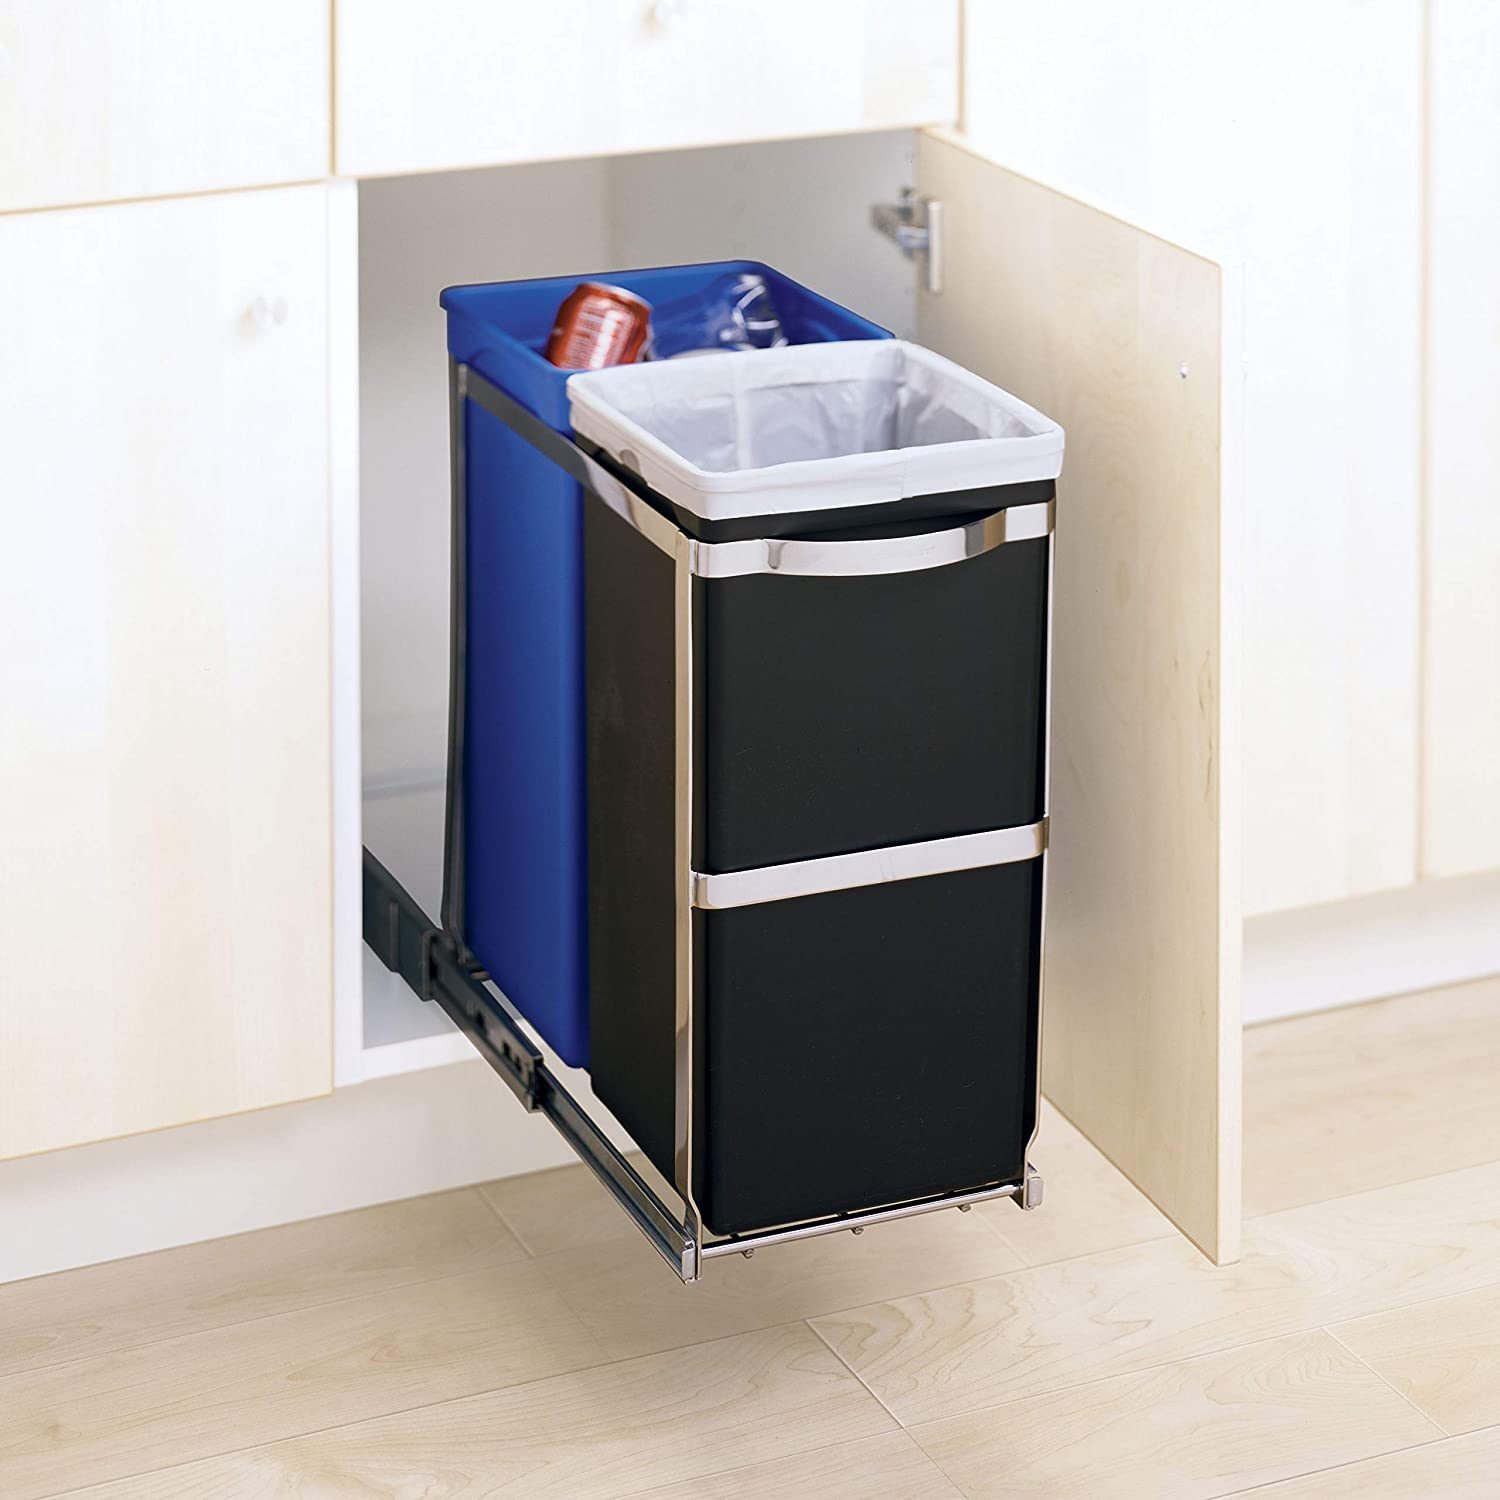 https://www.rd.com/wp-content/uploads/2022/07/Simplehuman-Dual-Compartment-Pull-Out-Recycling-Bin-and-Trash-Can-ecomm-via-amazo.com_.jpg?fit=700%2C700